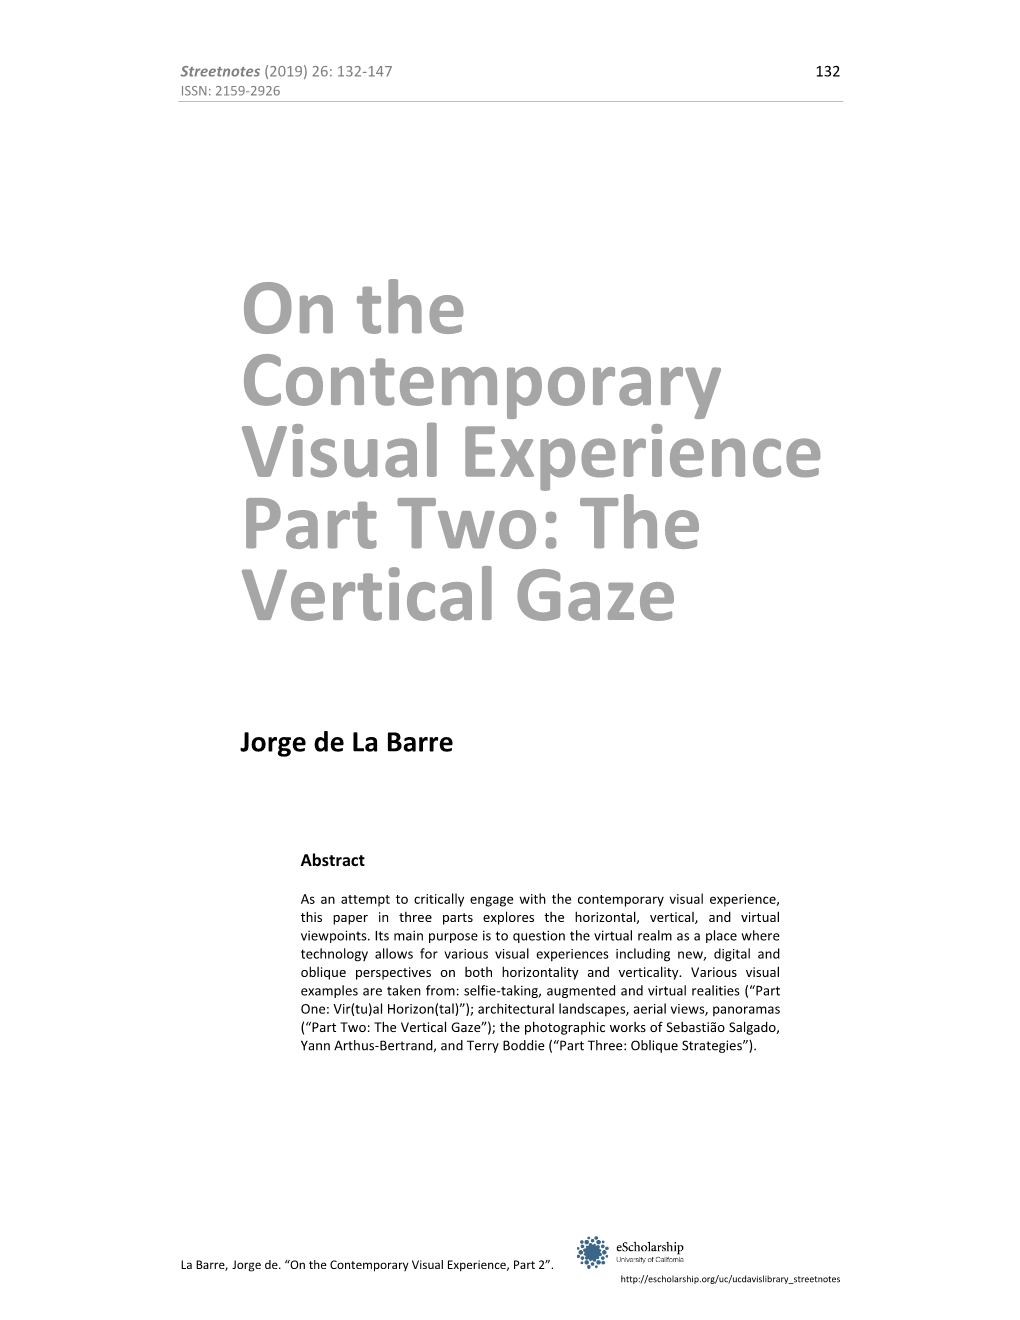 On the Contemporary Visual Experience Part Two: the Vertical Gaze